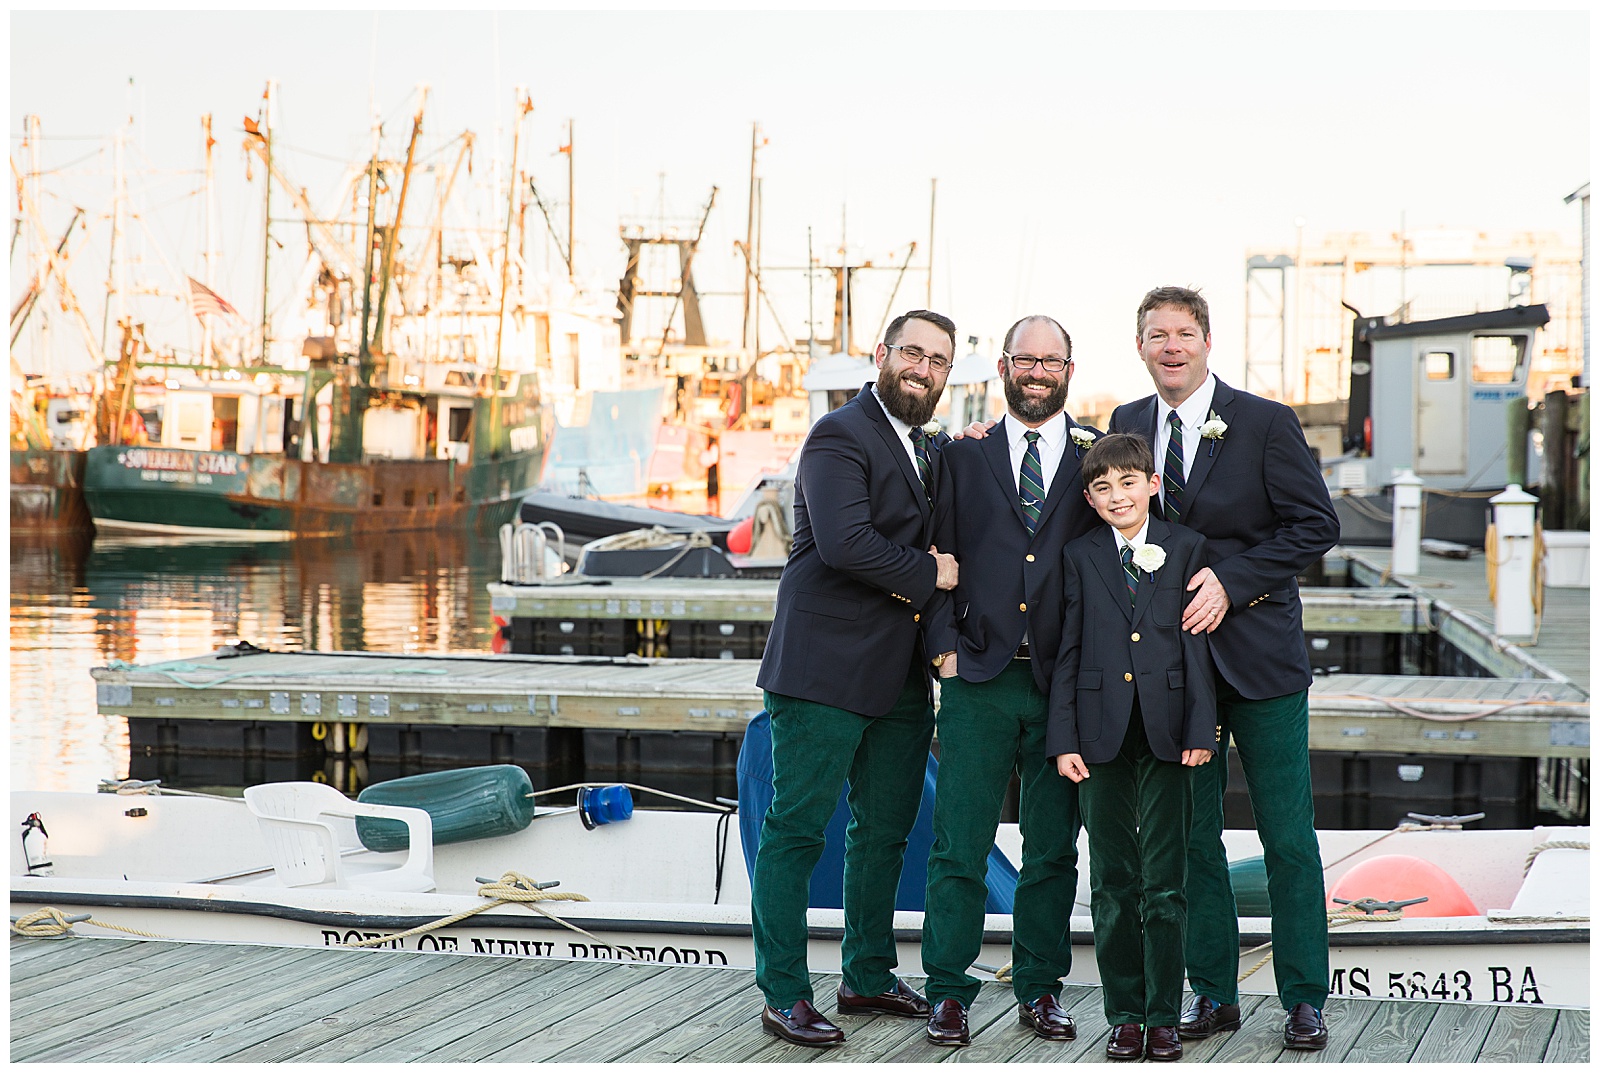 Groomsmen pose near the fishing boats in New Bedford harbor